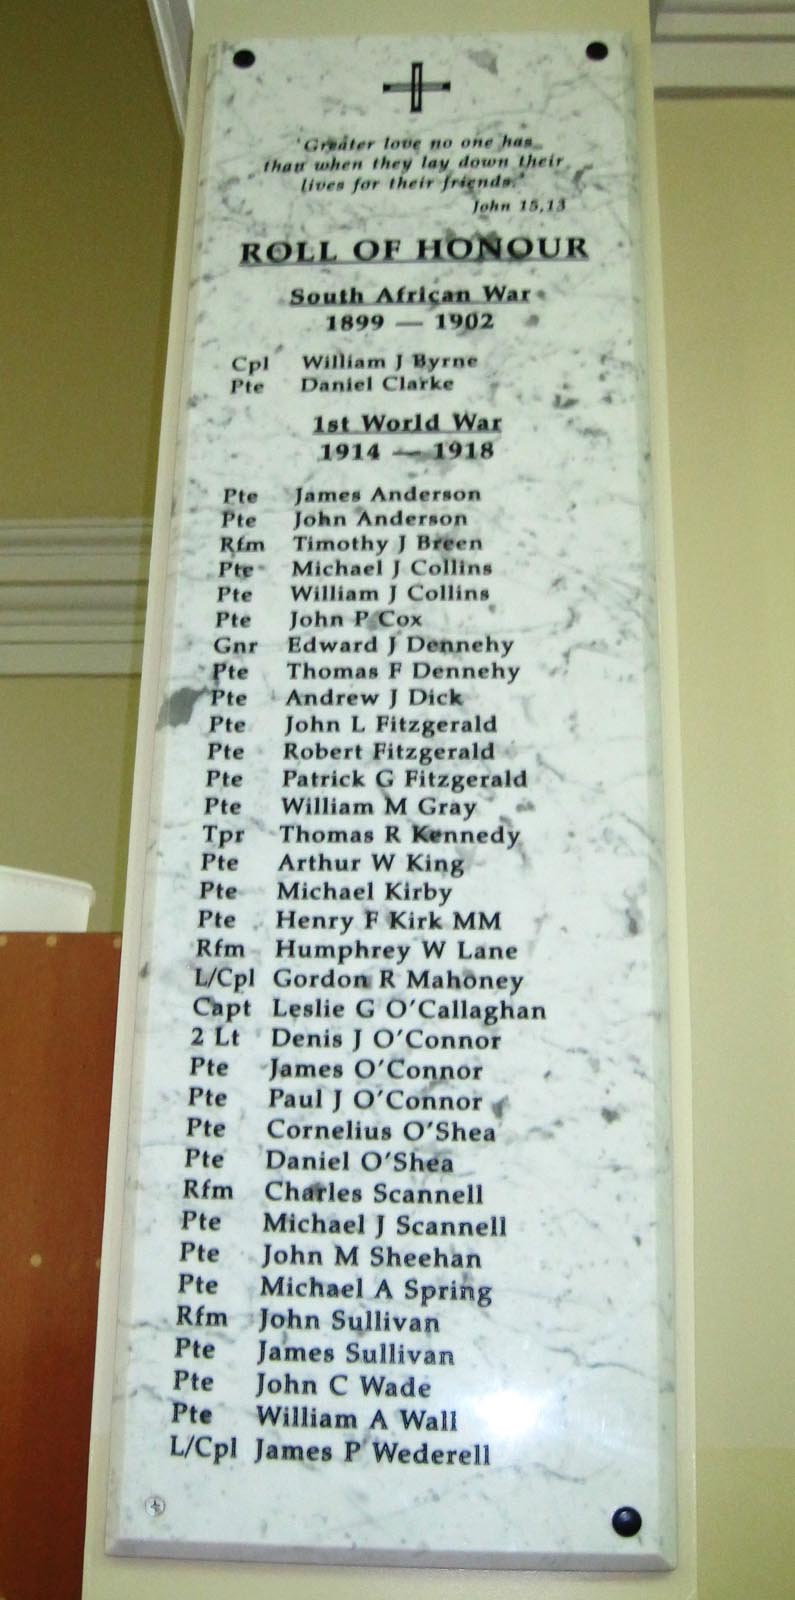 Sacred Heart Basilica memorial plaque, photographed about 2010